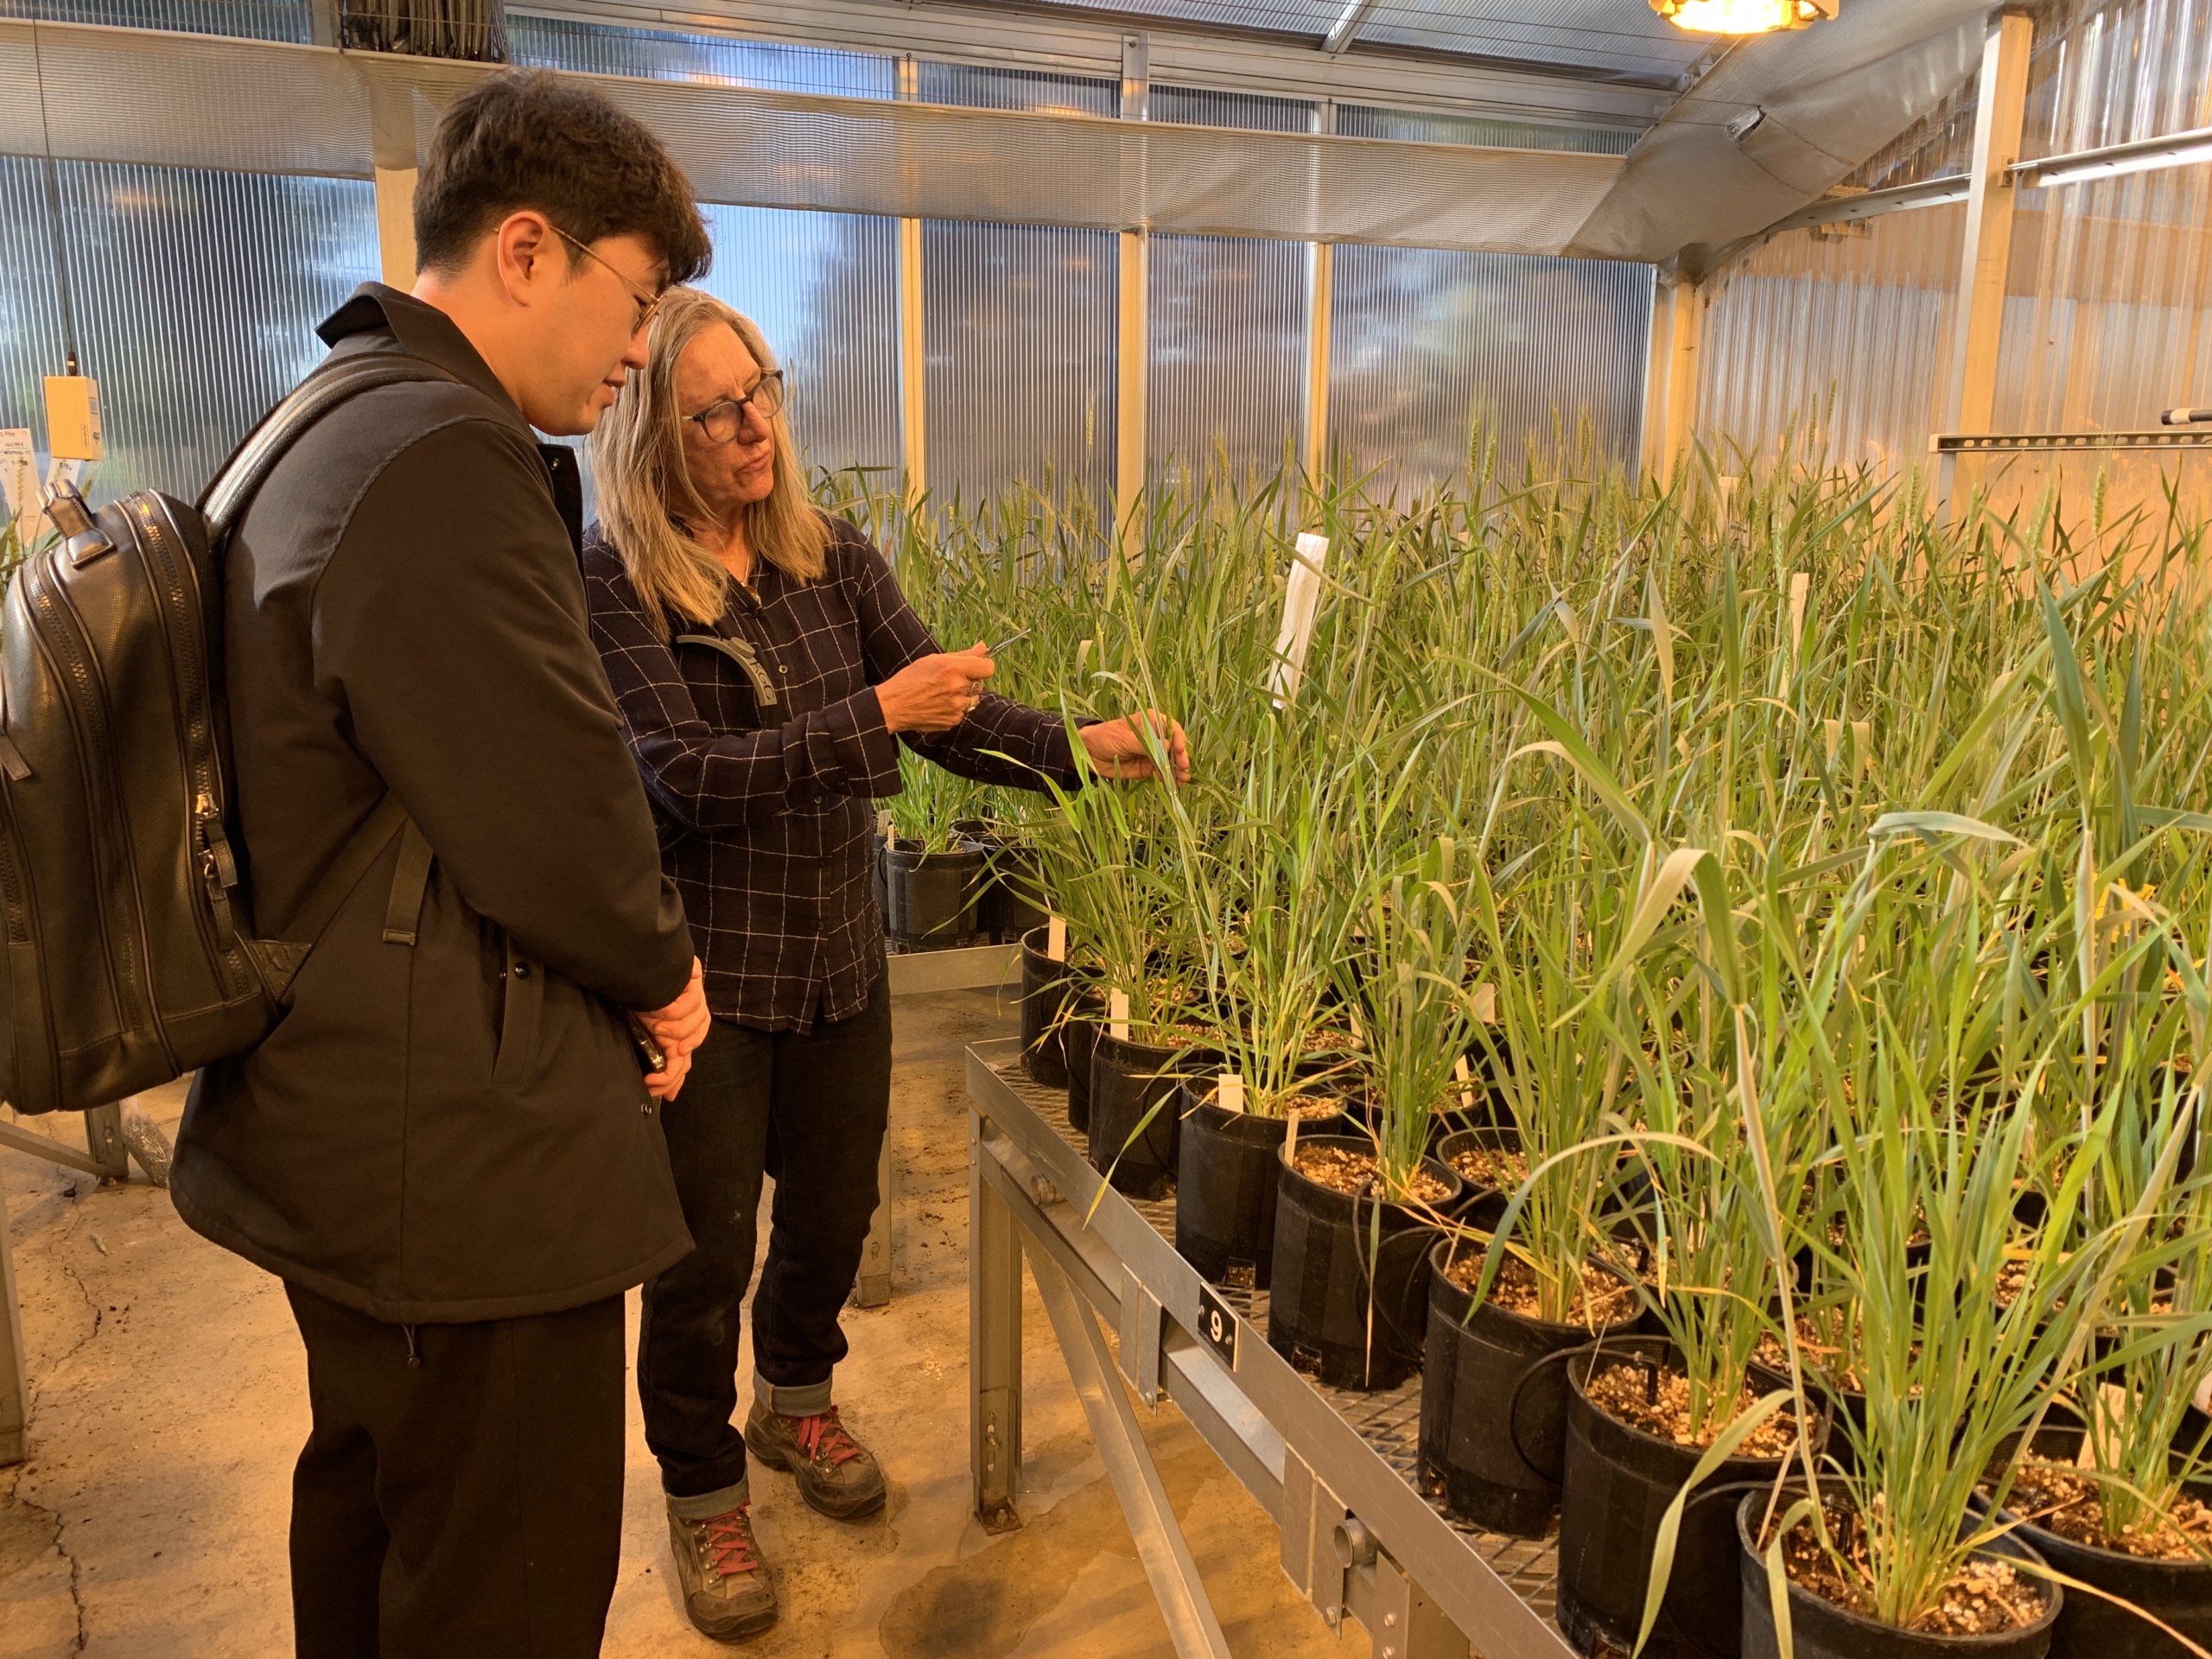 A woman in a greenhouse at the Washington State University showing wheat breeding research to a Korean man.